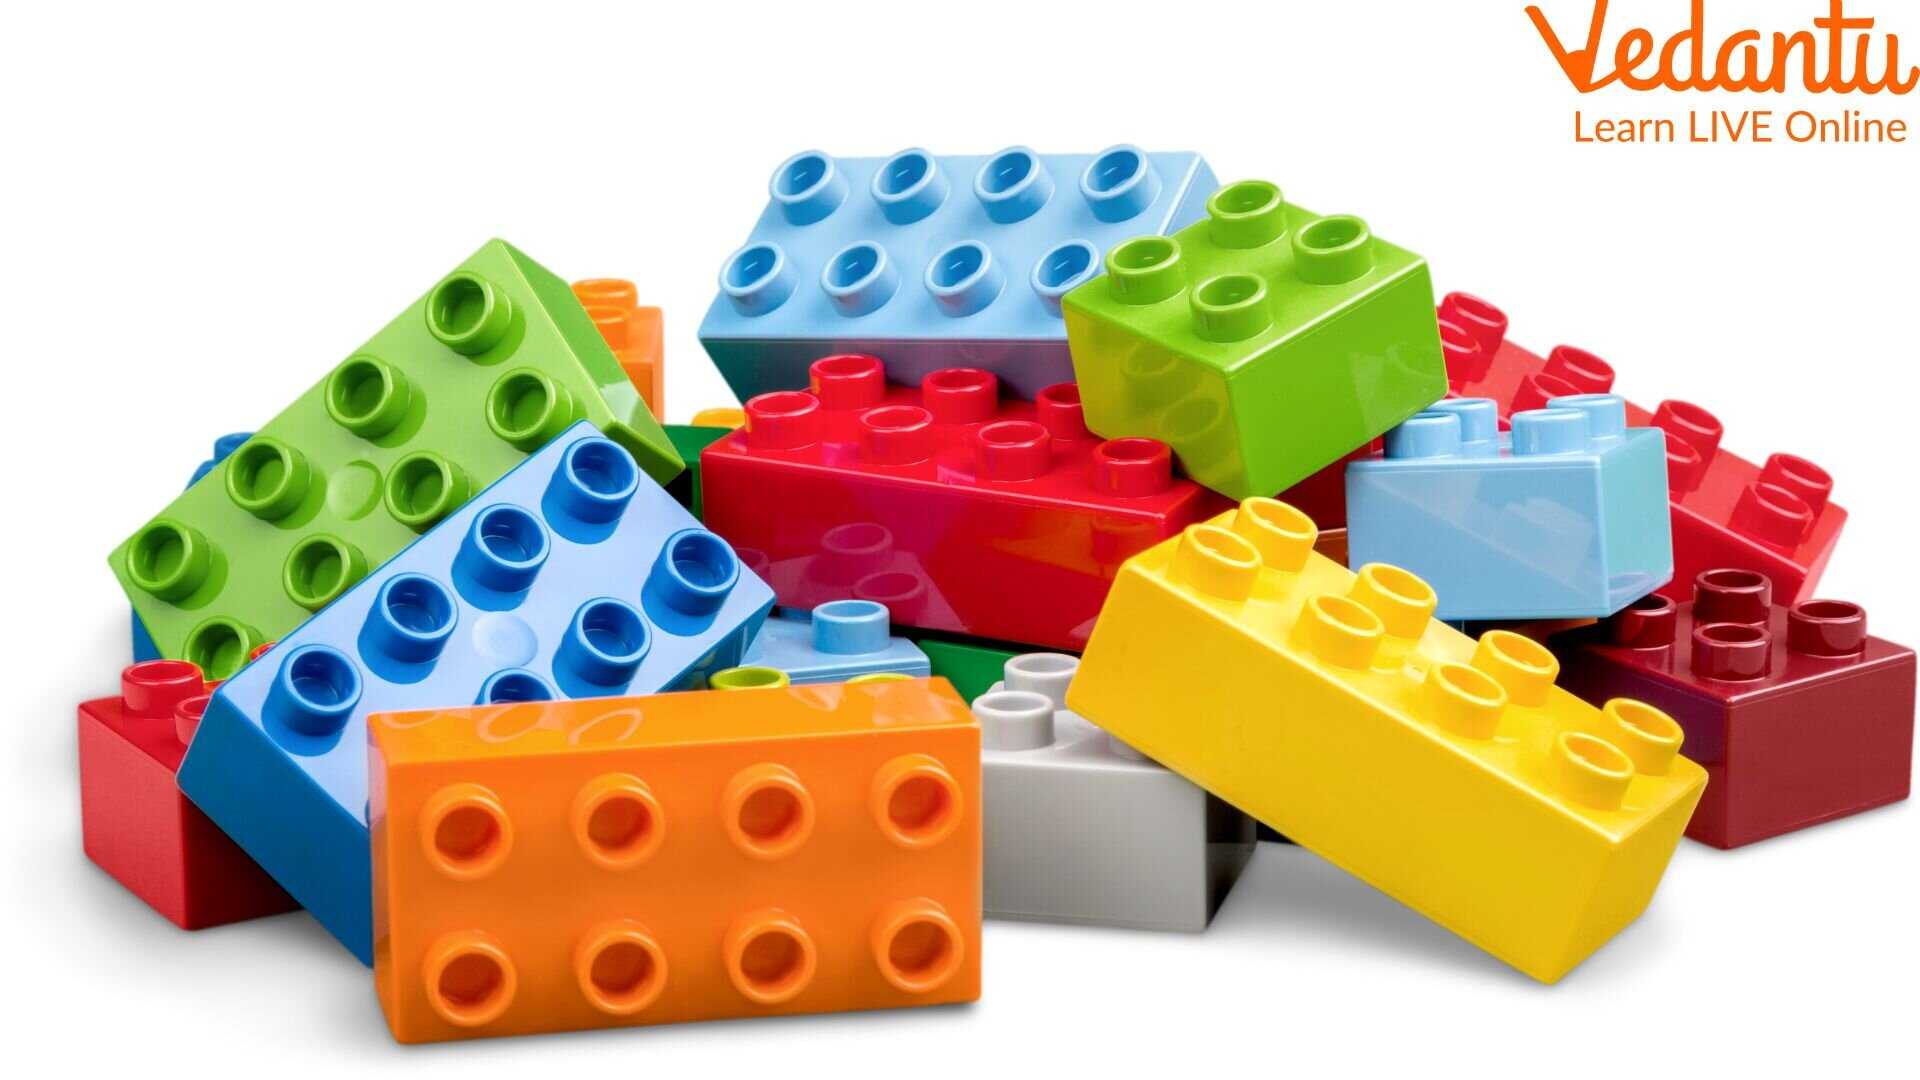 The Original Story of Lego That Inspires Us to the Core